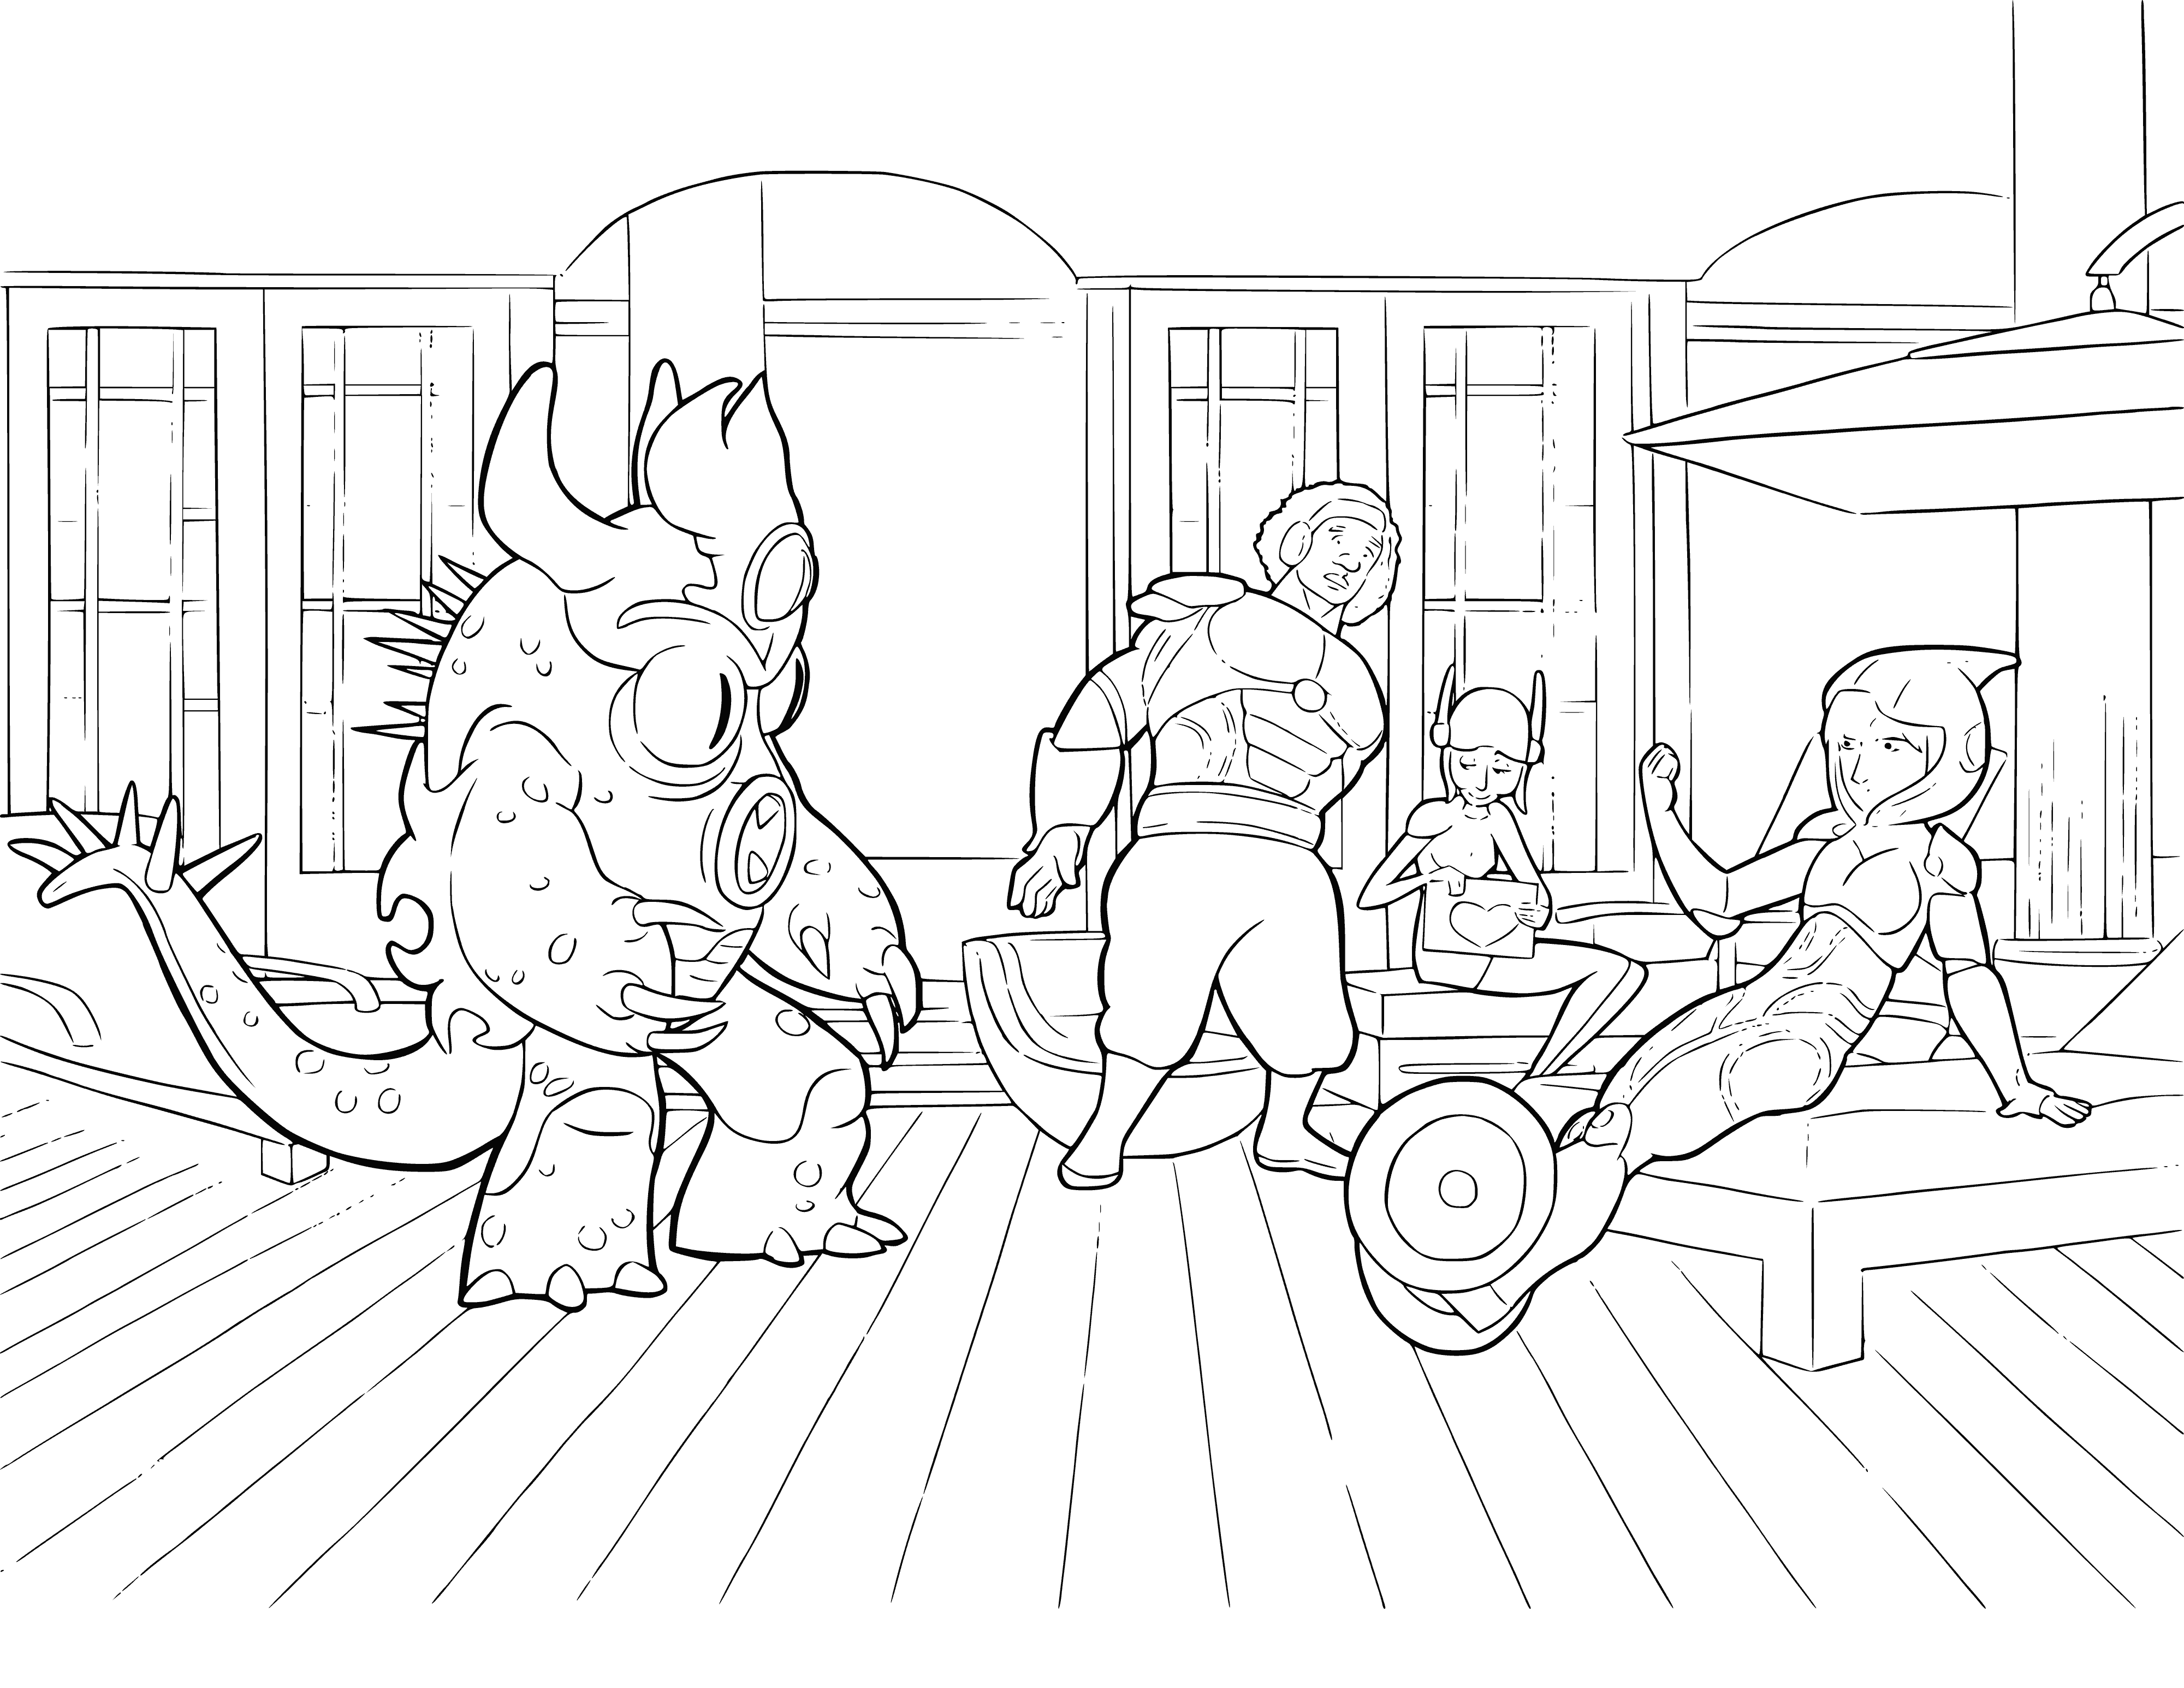 Heroes with battle suits coloring page